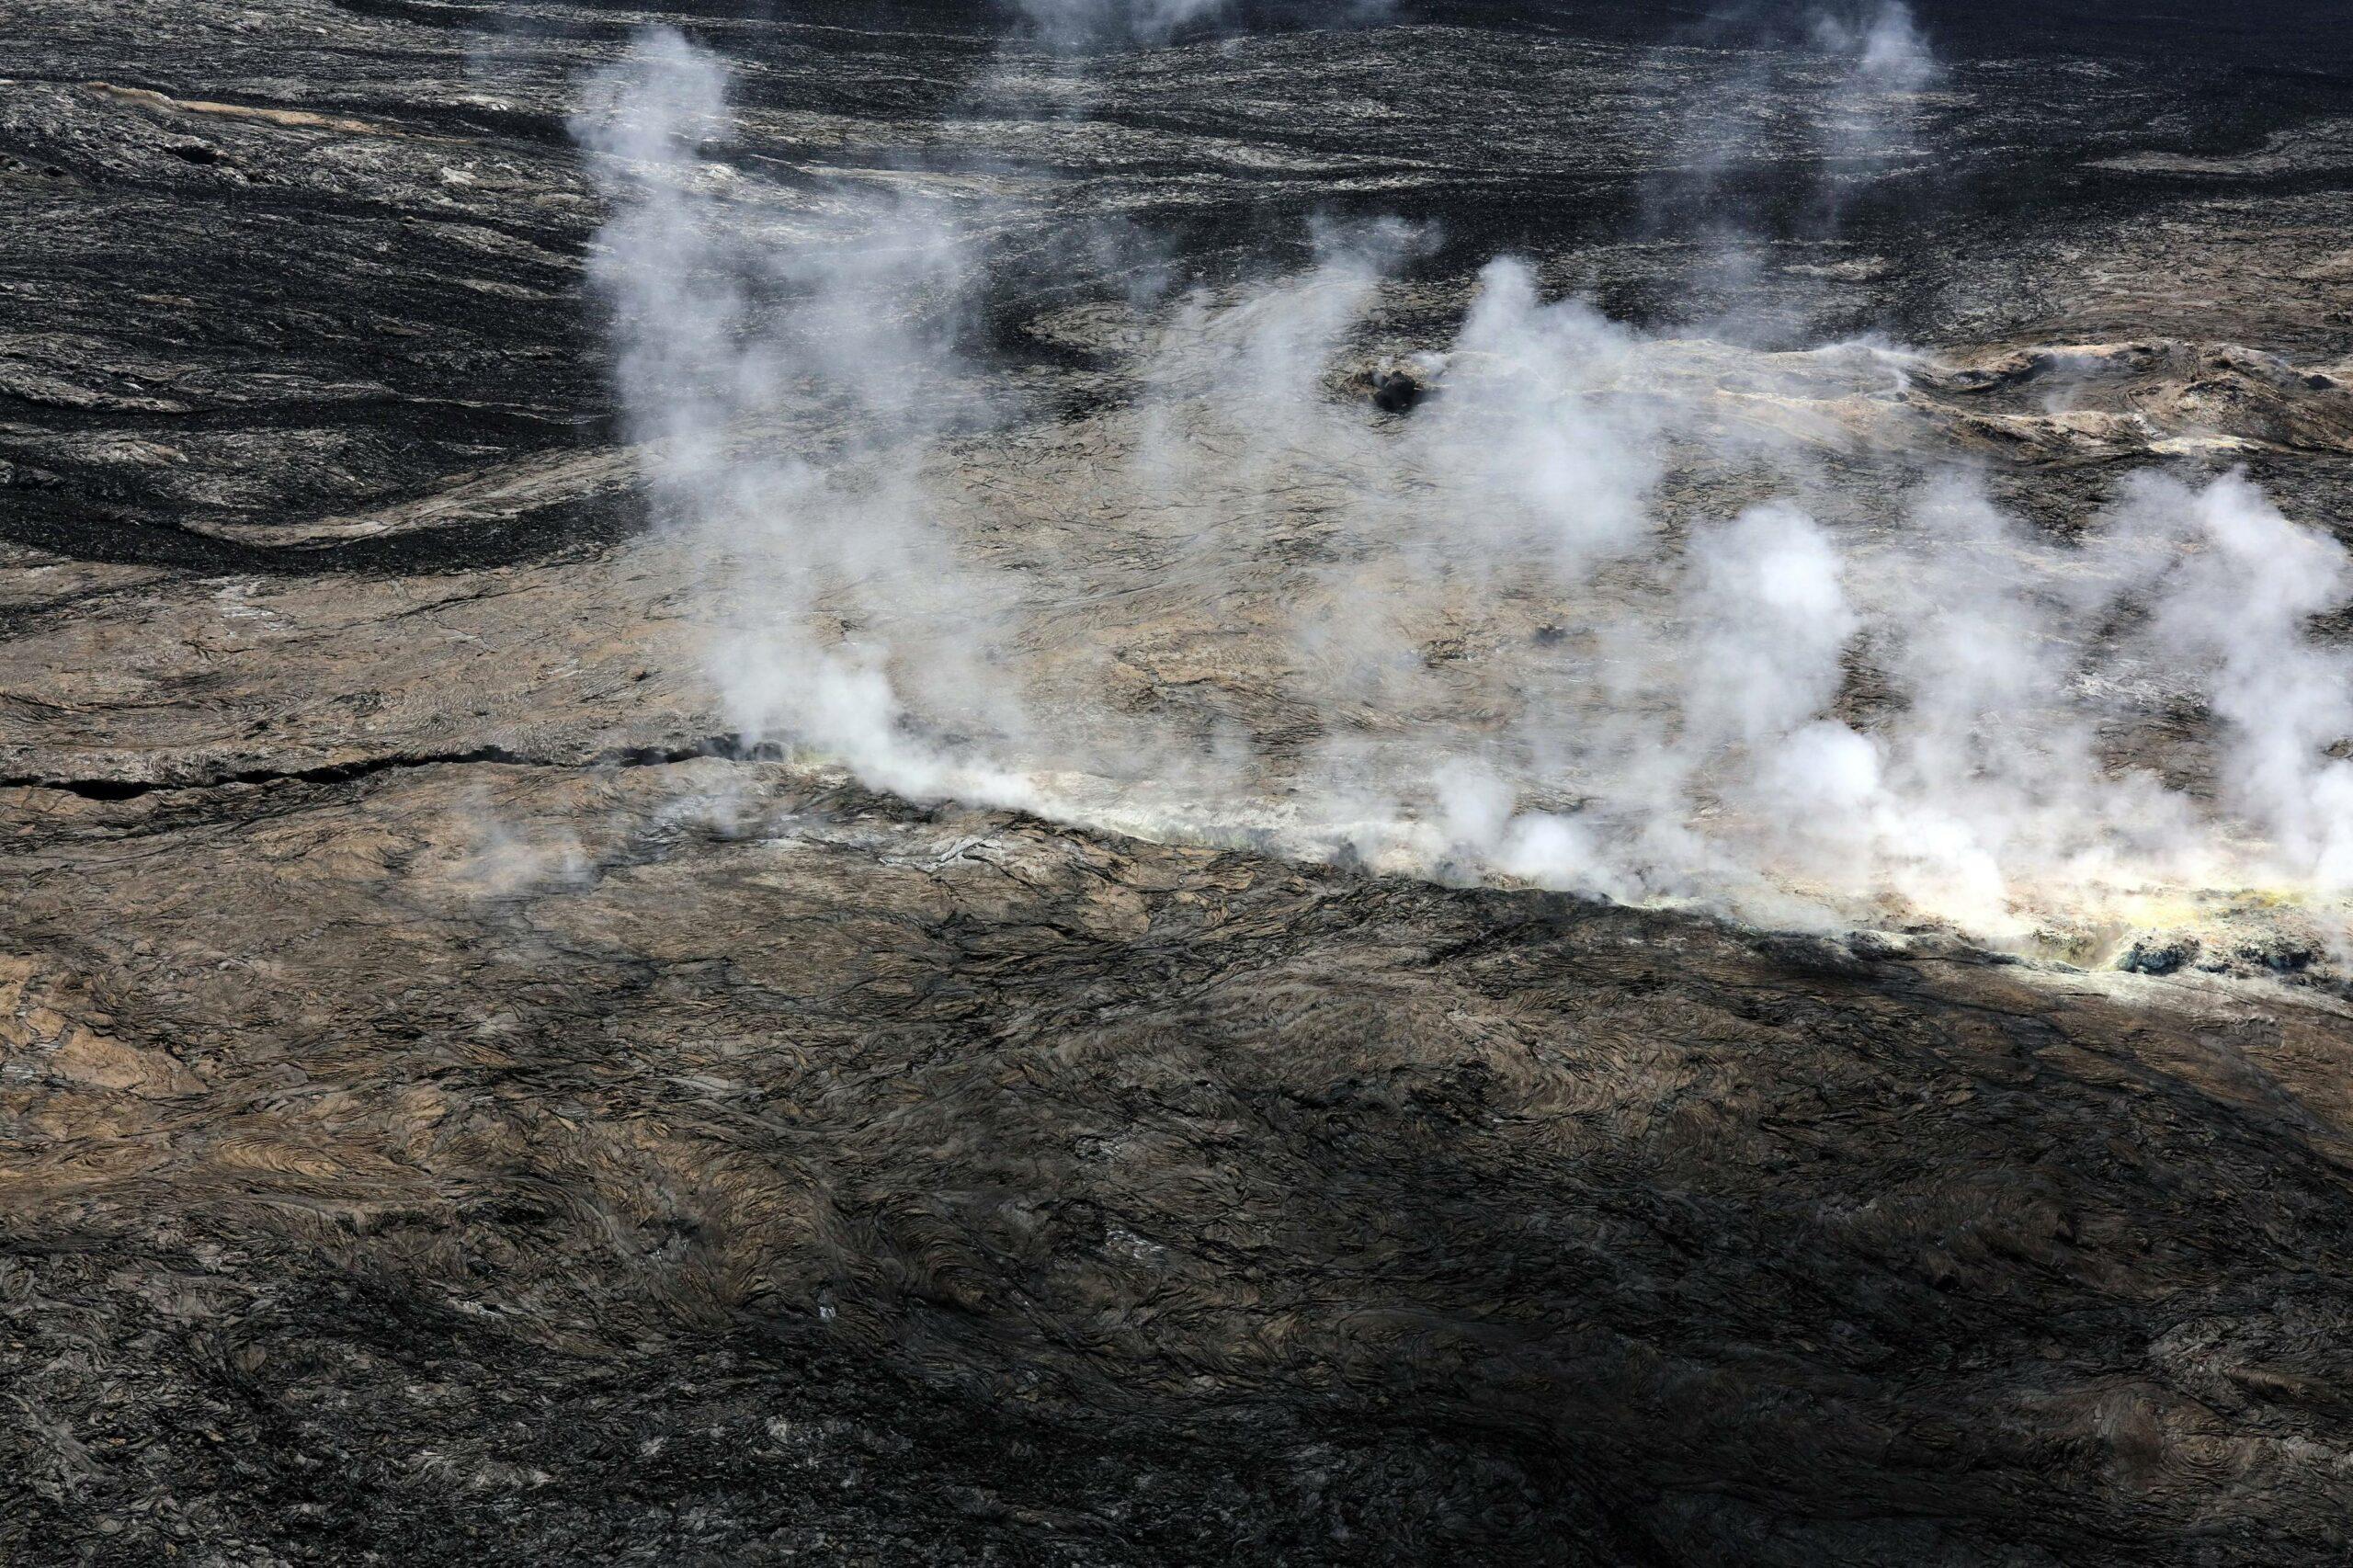 Mauna Loa Volcano In Hawaii Makes A Blazing Return As It Erupts After Months Of Heightened Unrest